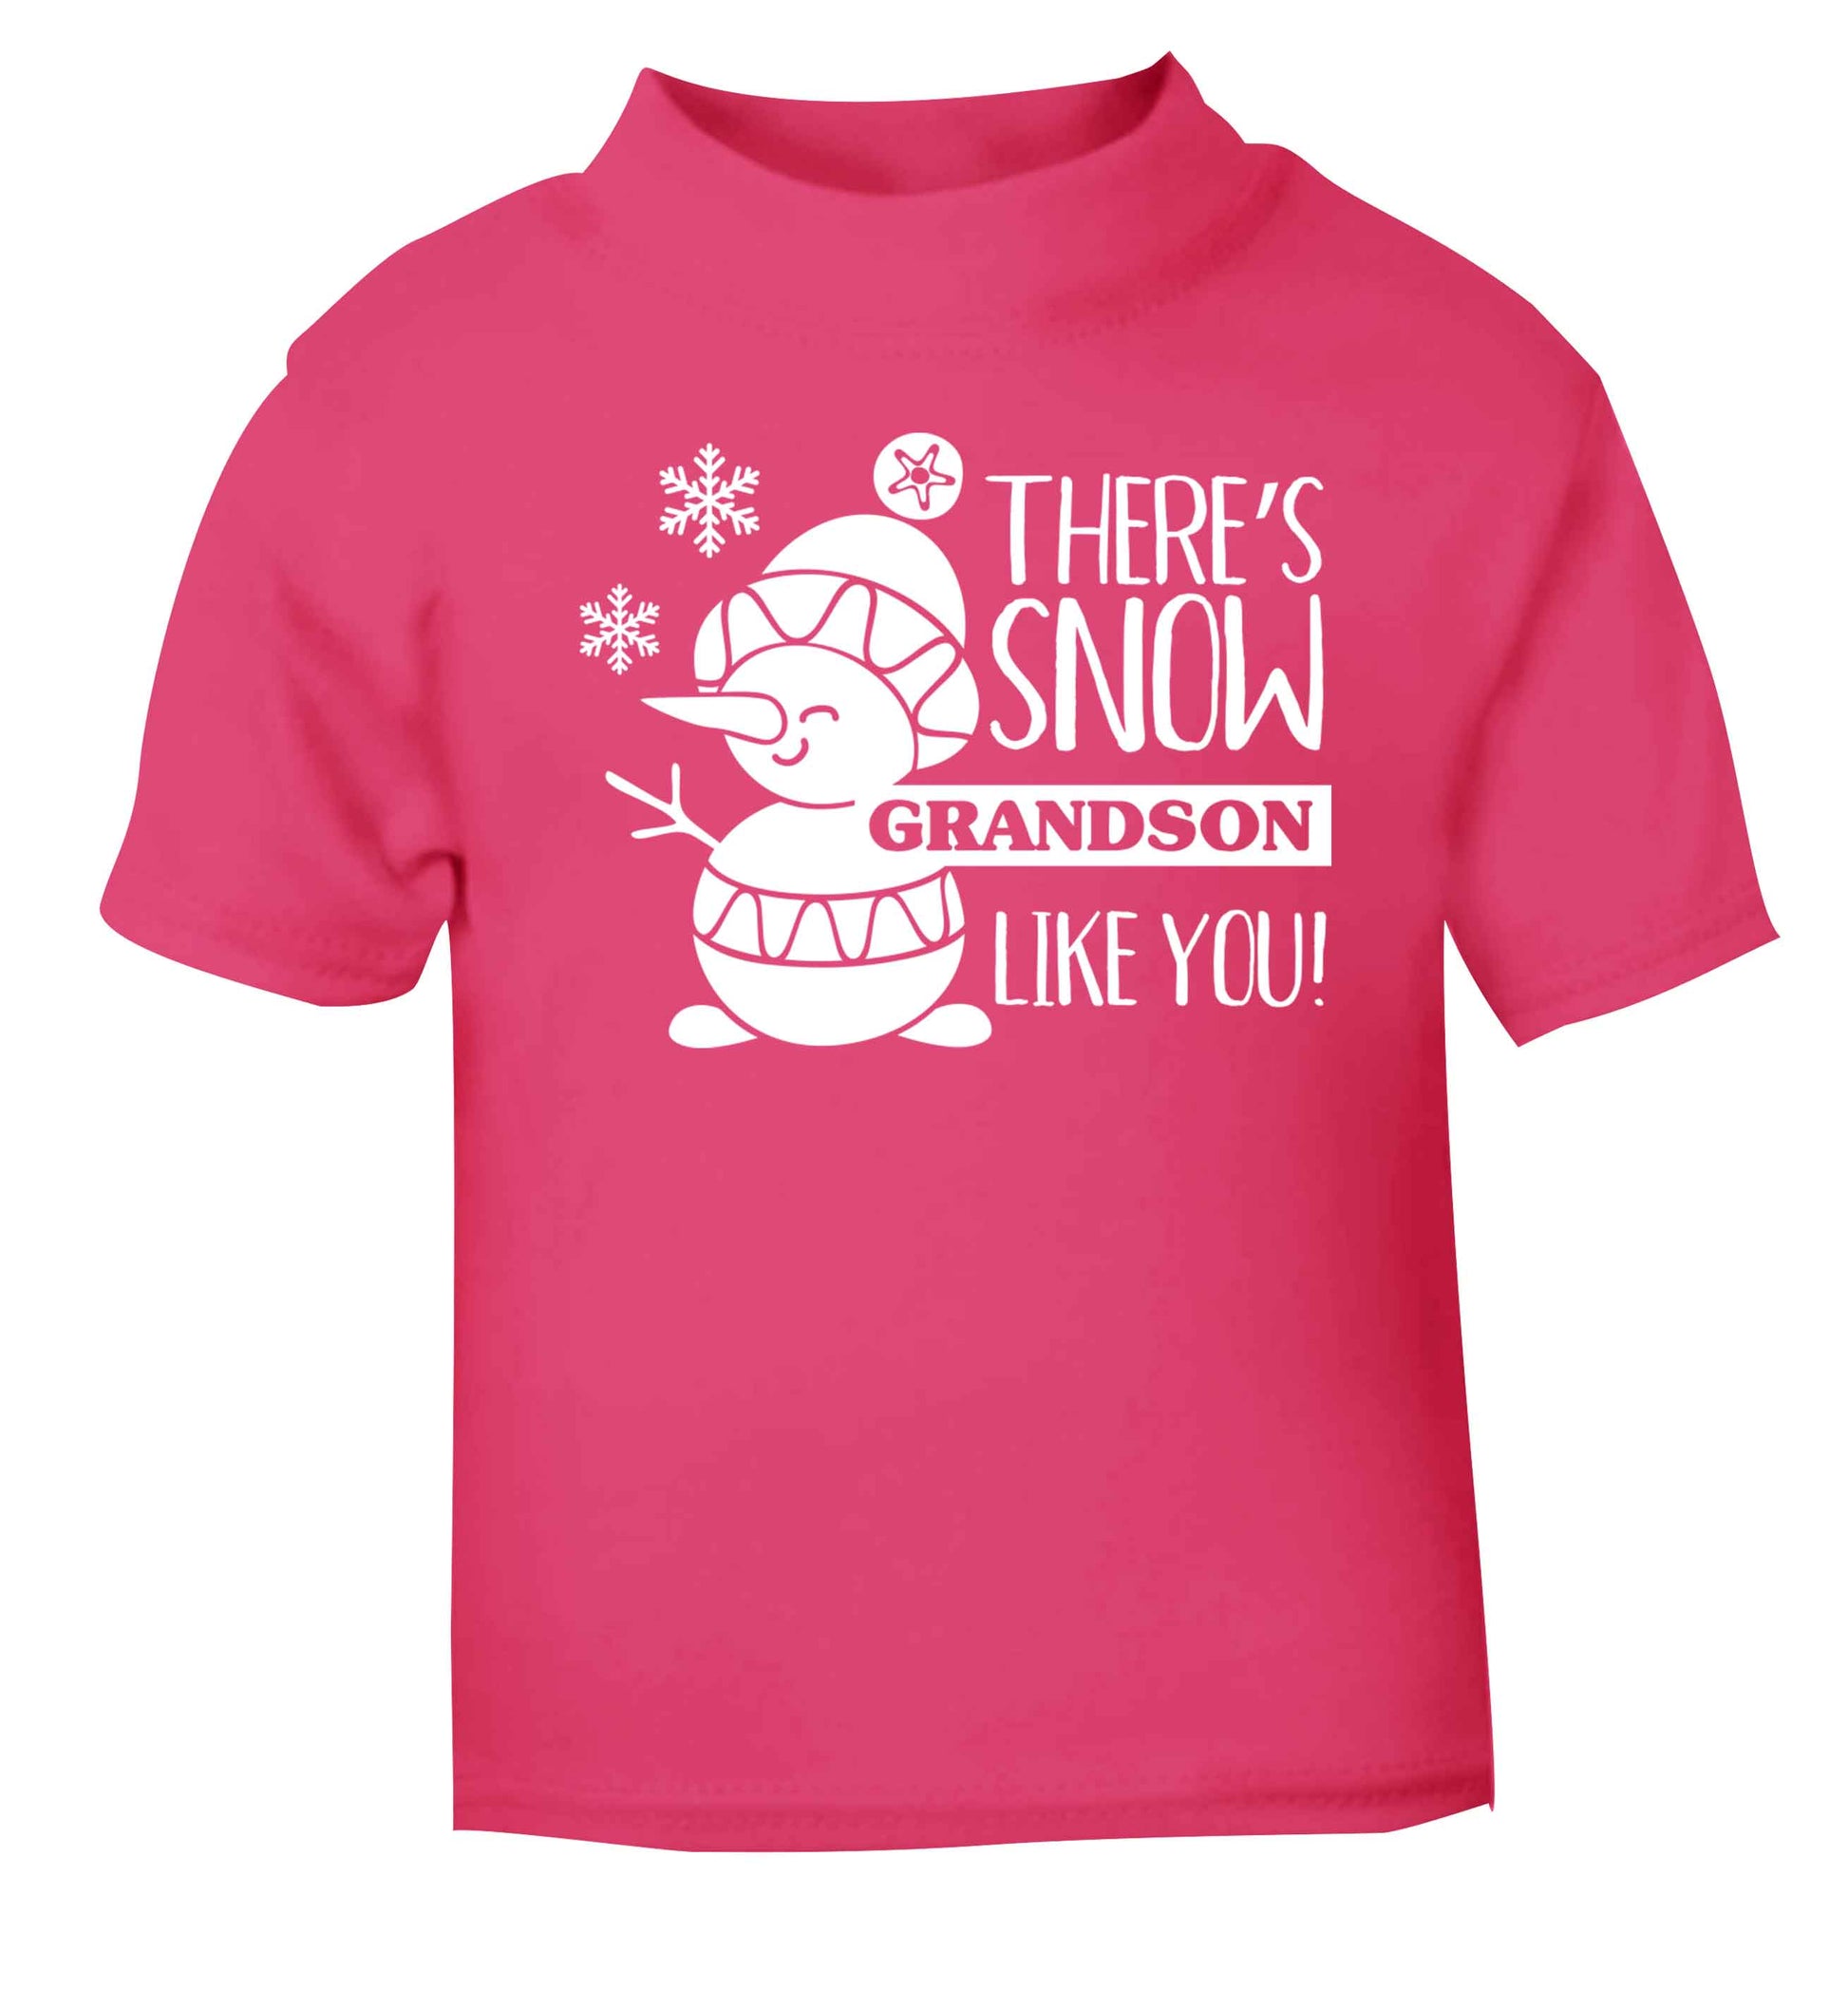 There's snow grandson like you pink baby toddler Tshirt 2 Years